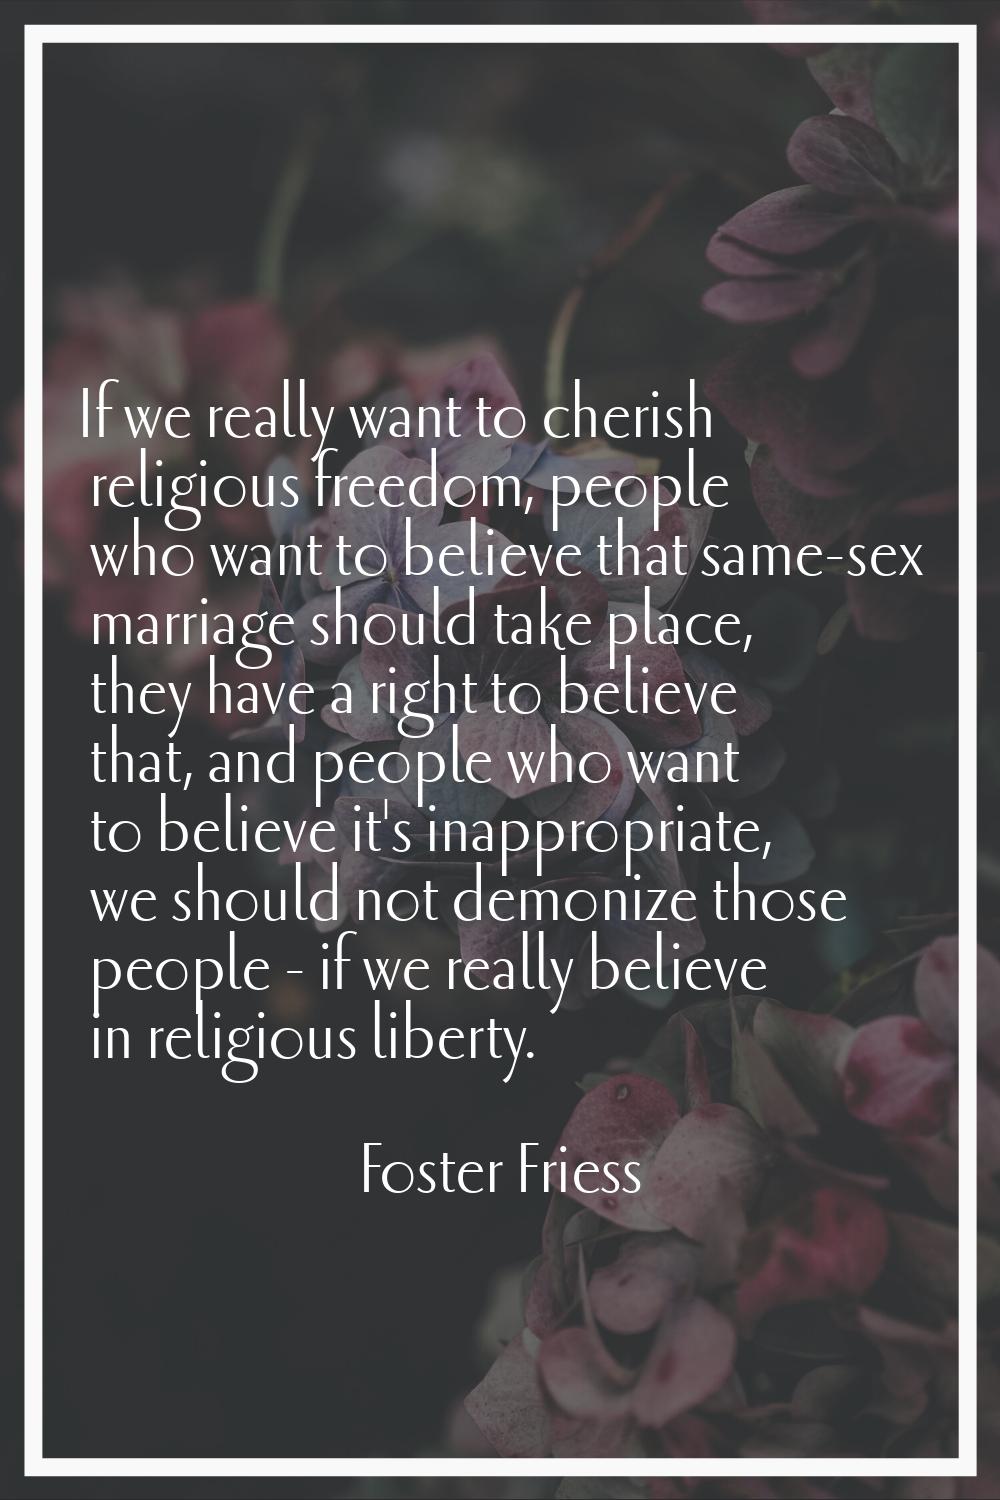 If we really want to cherish religious freedom, people who want to believe that same-sex marriage s